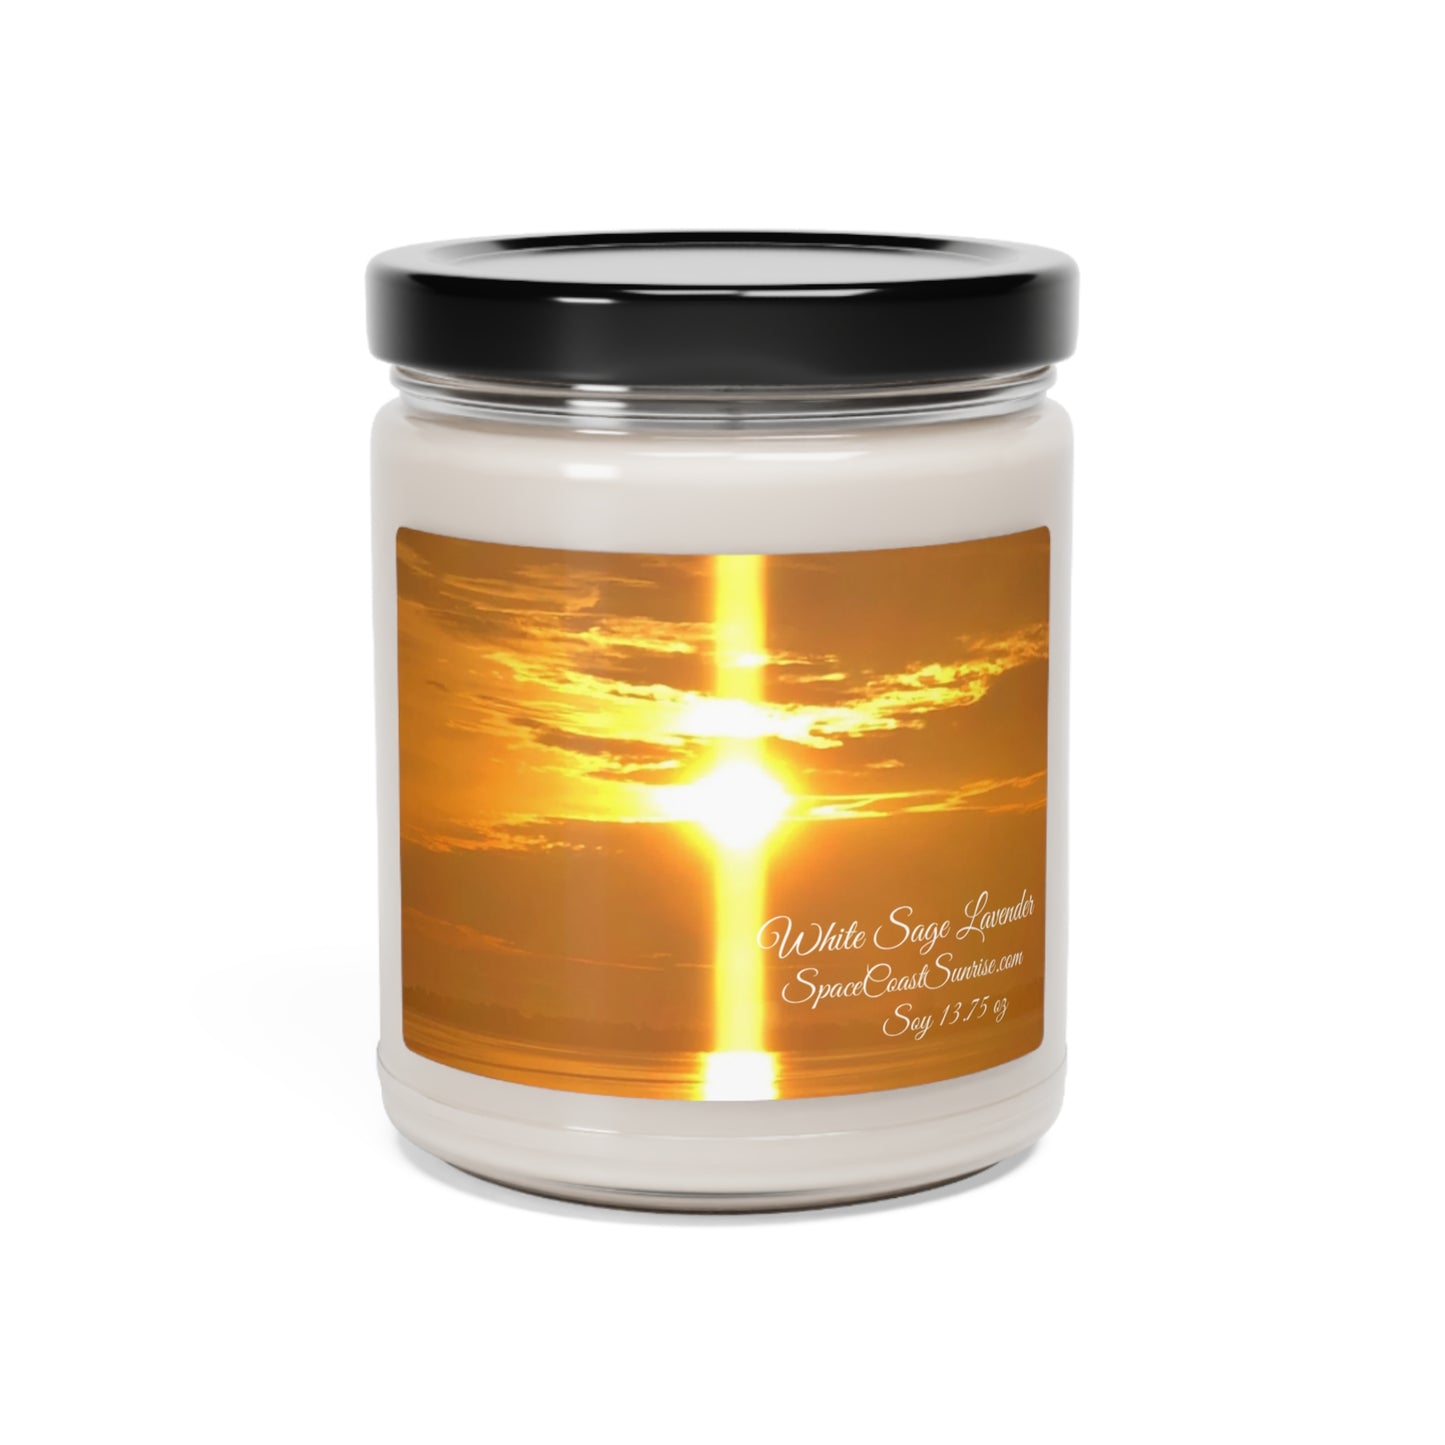 Sunrise Classic White Sage & Lavender Scented Soy Candle, 9oz